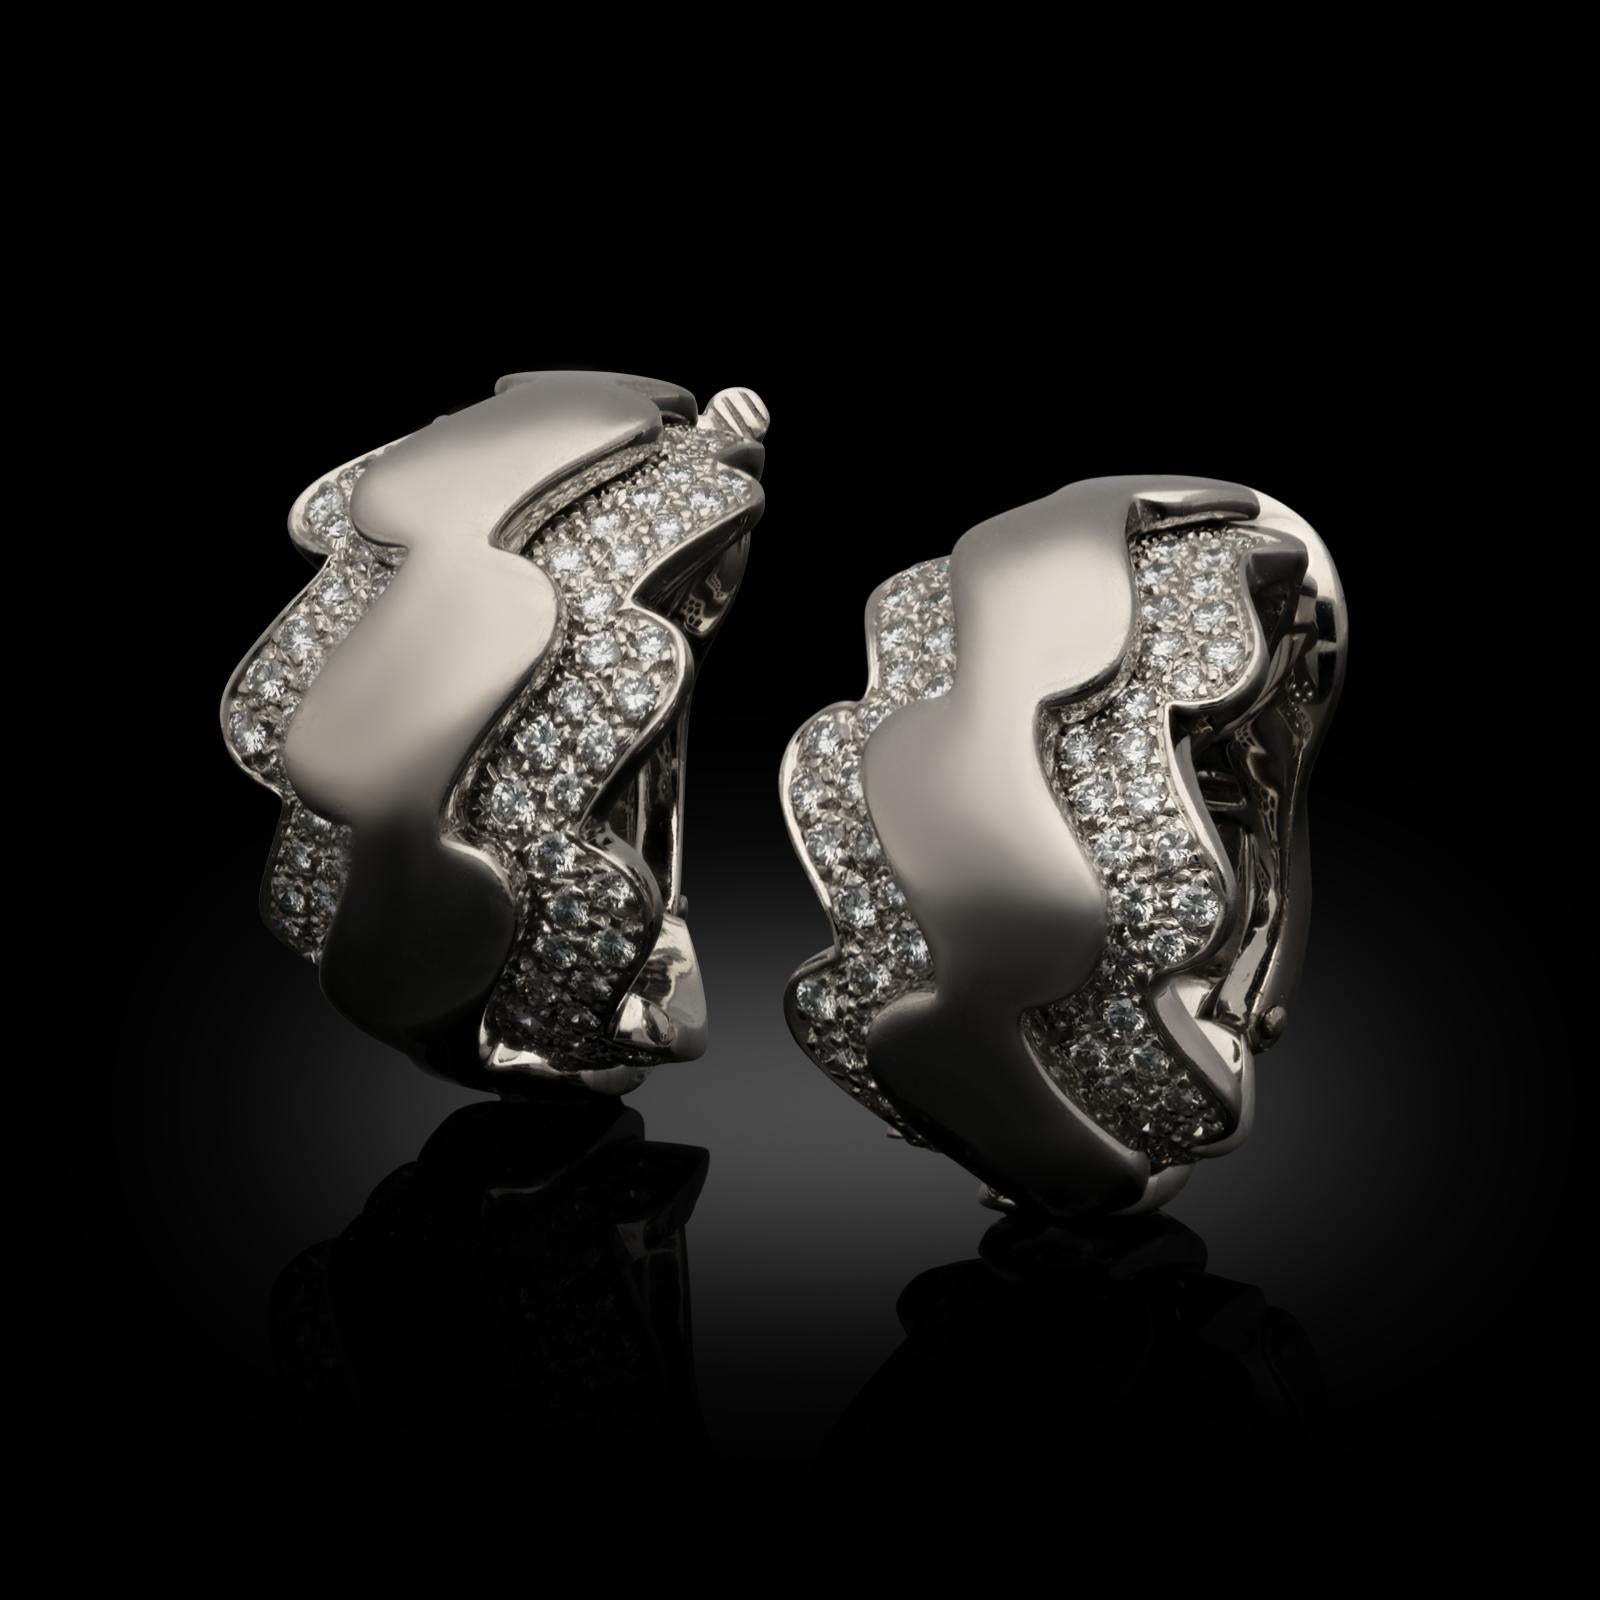 A pair of 18ct white gold and diamond earrings by Van Cleef & Arpels c.2000s, the hoop shape earrings of undulating wave like form in white gold have a central raised band of highly polished gold edged to each side with a double row frame of round